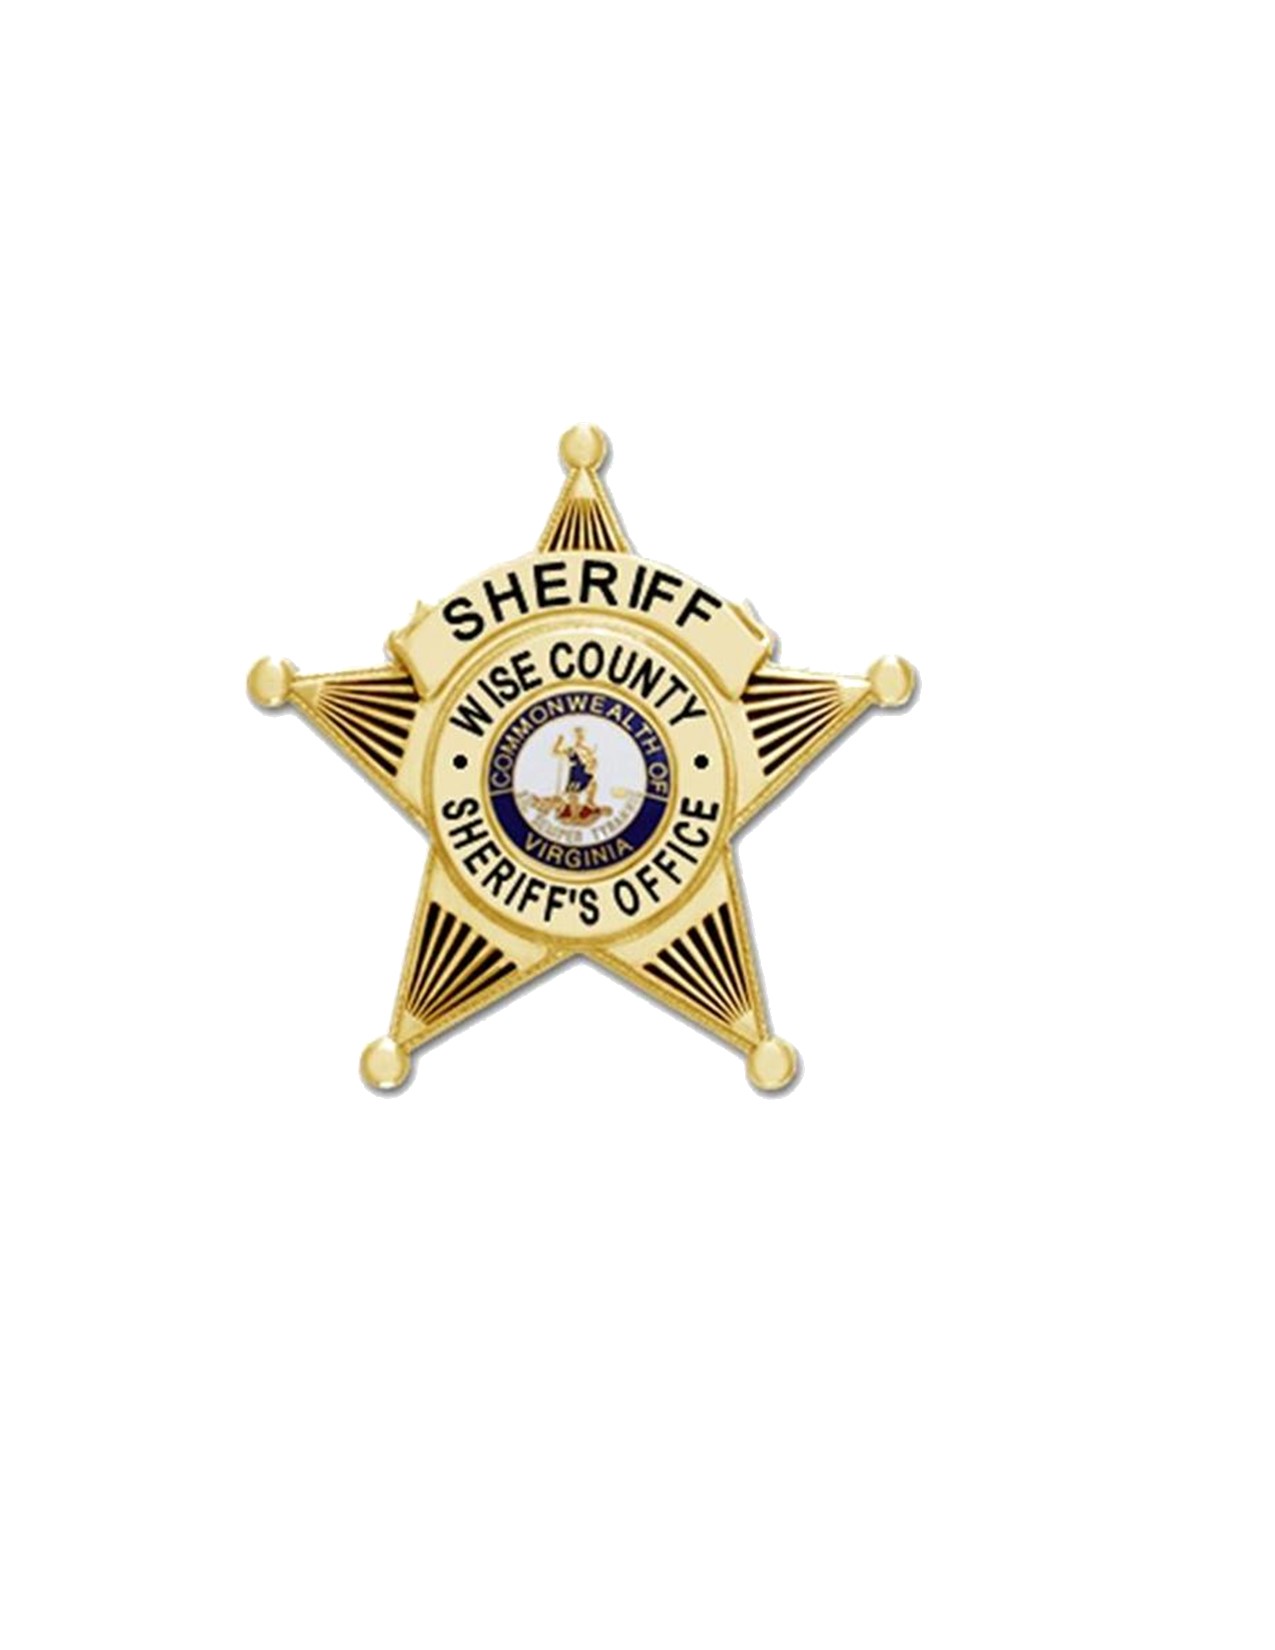 Wise County Sheriff's Office, VA Police Jobs